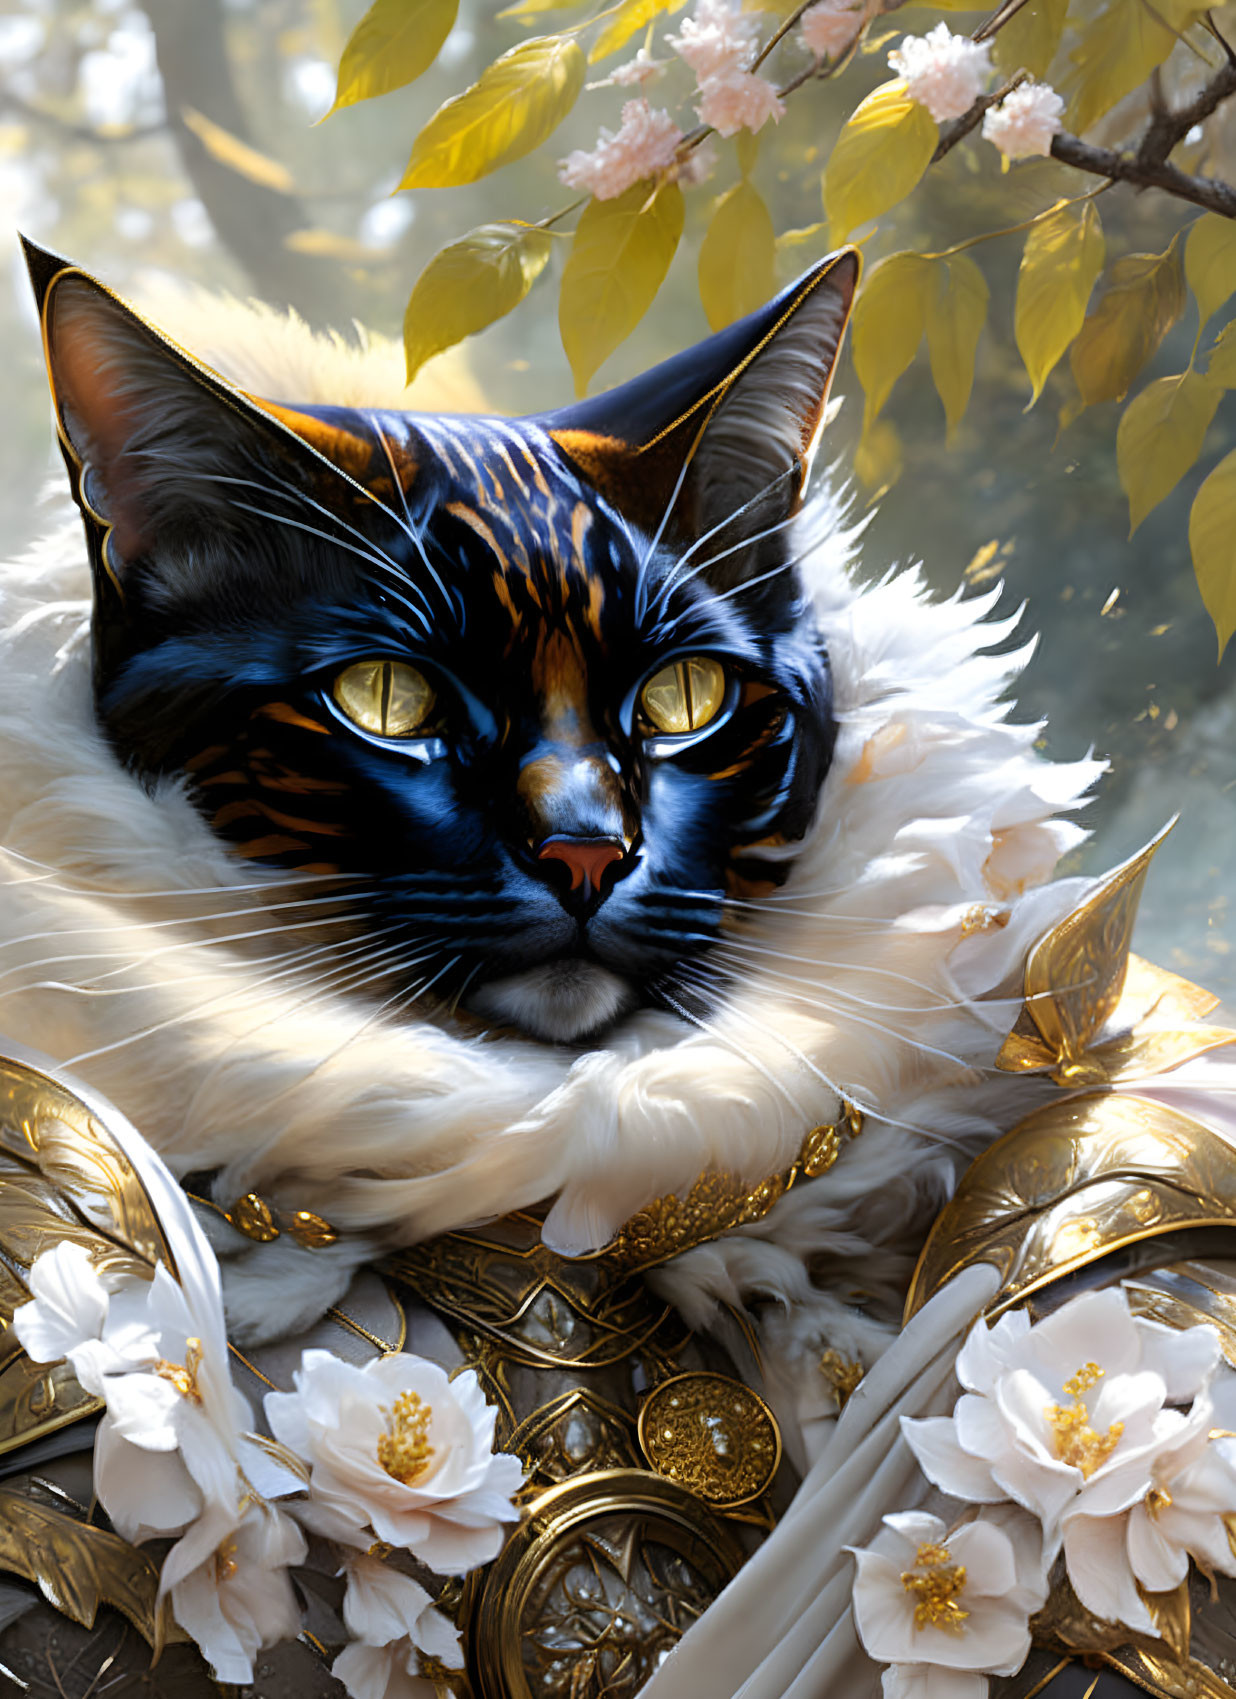 Sir Timothy Meowmers, Knight of Blossoms